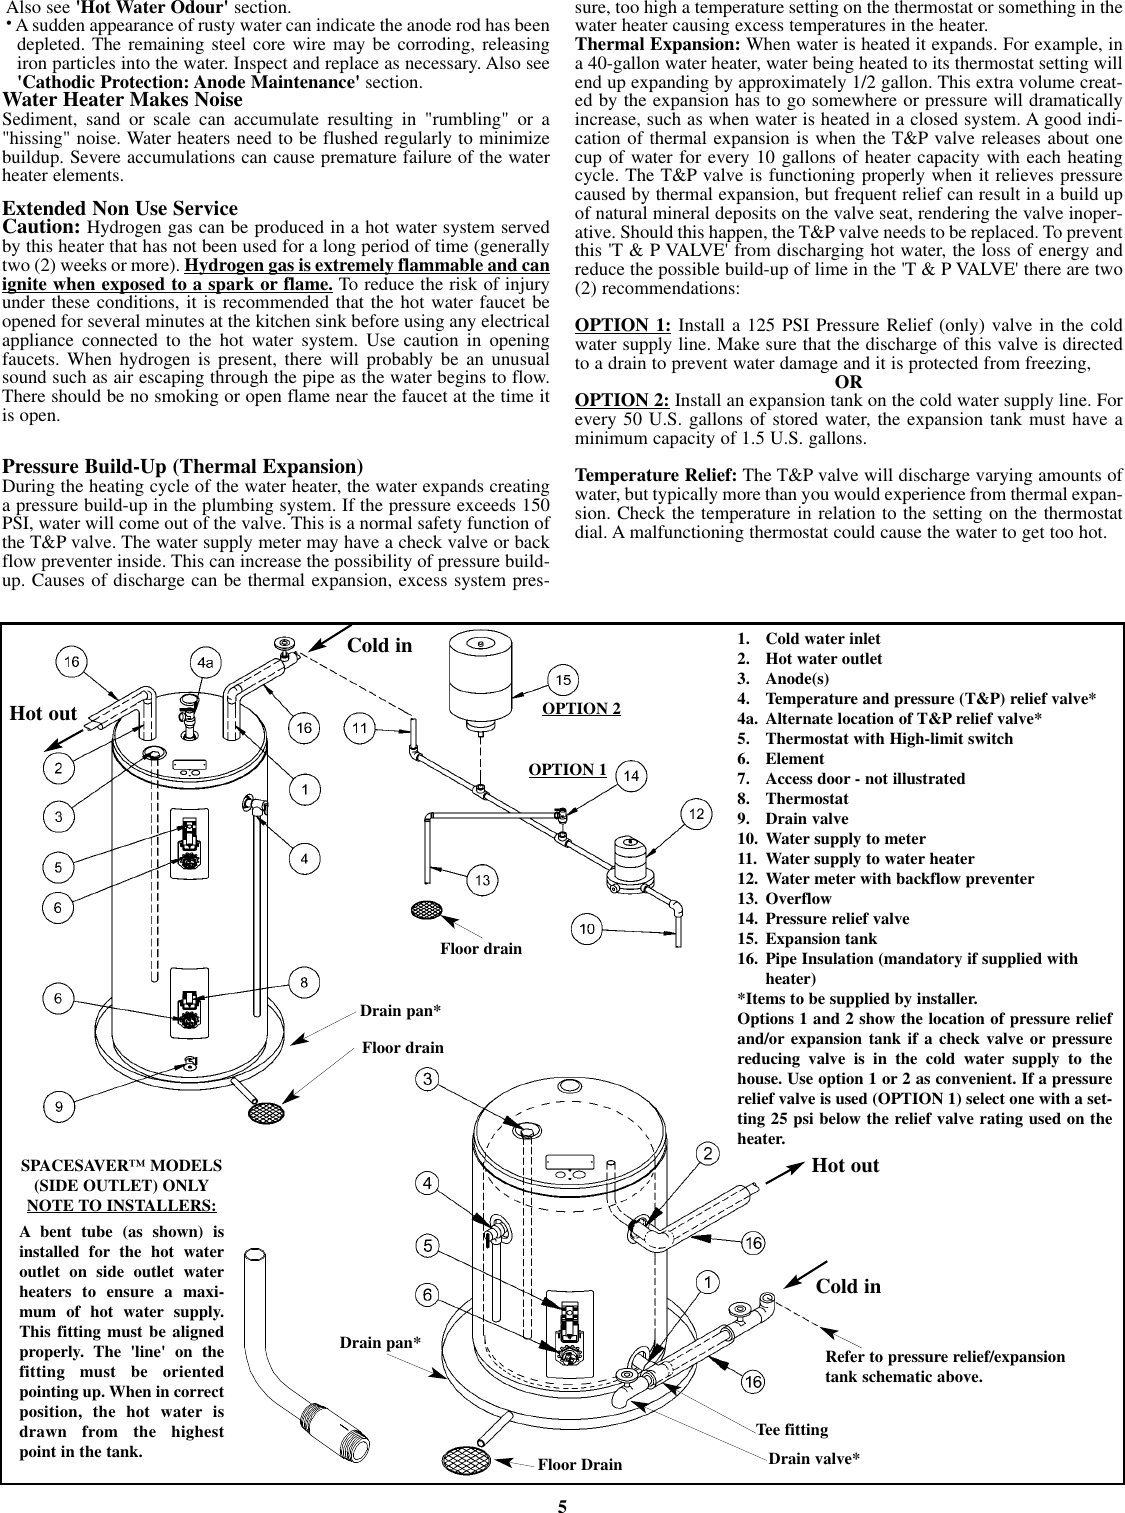 Page 5 of 6 - Gsw Gsw-Electric-Water-Heater-P-N-61515-Rev-G-05-03-Users-Manual-  Gsw-electric-water-heater-p-n-61515-rev-g-05-03-users-manual